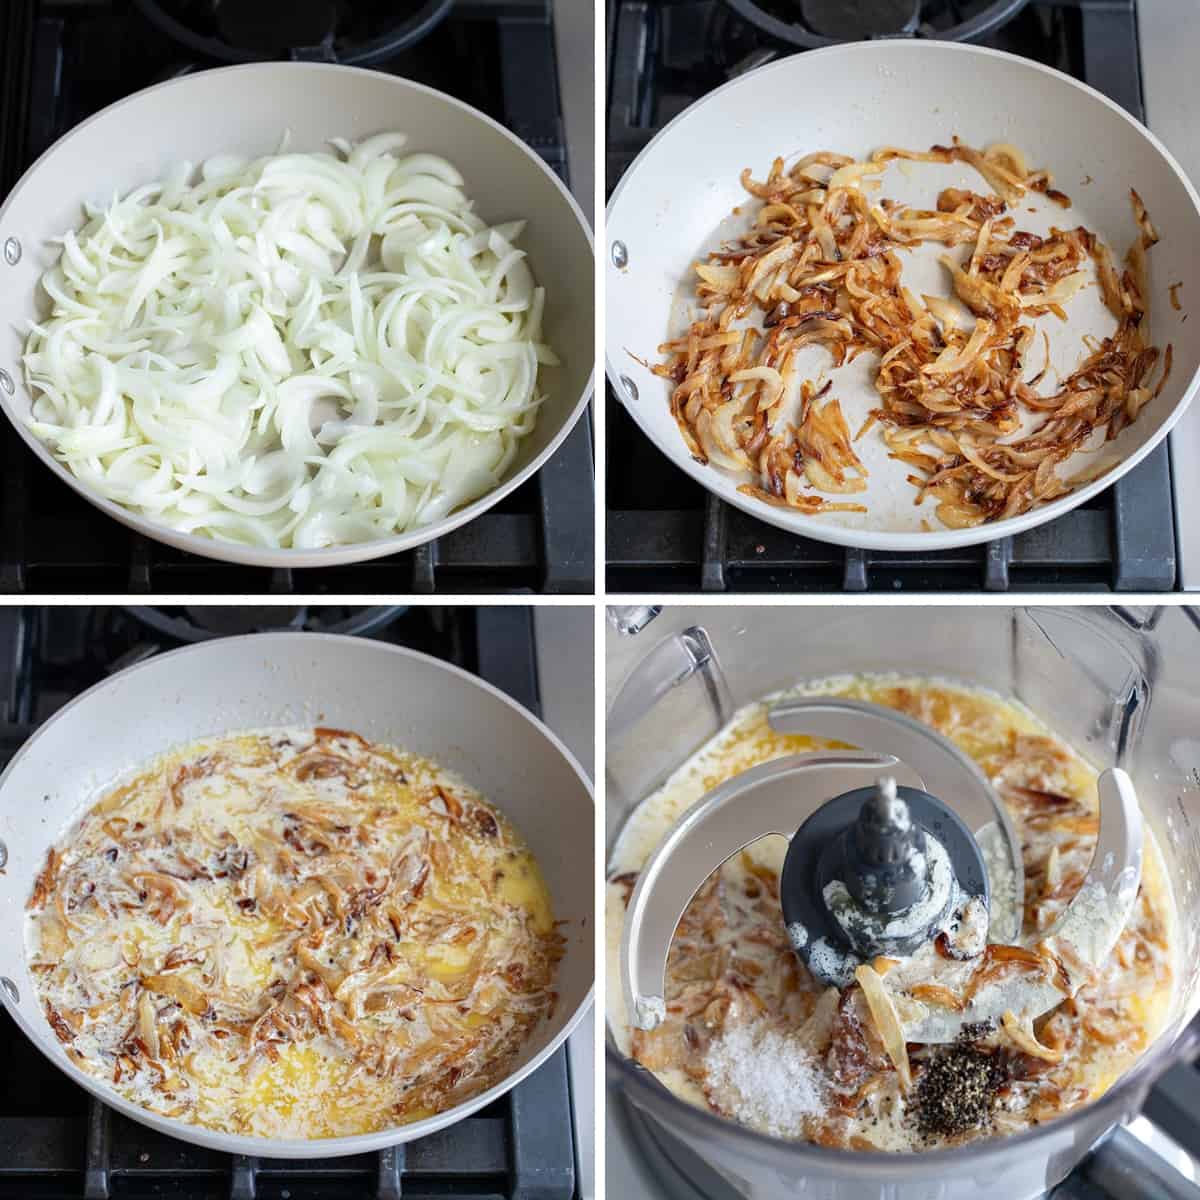 Steps for Caramelizing Onions and then Adding to Blender to Make French Onion Roasted Potatoes.